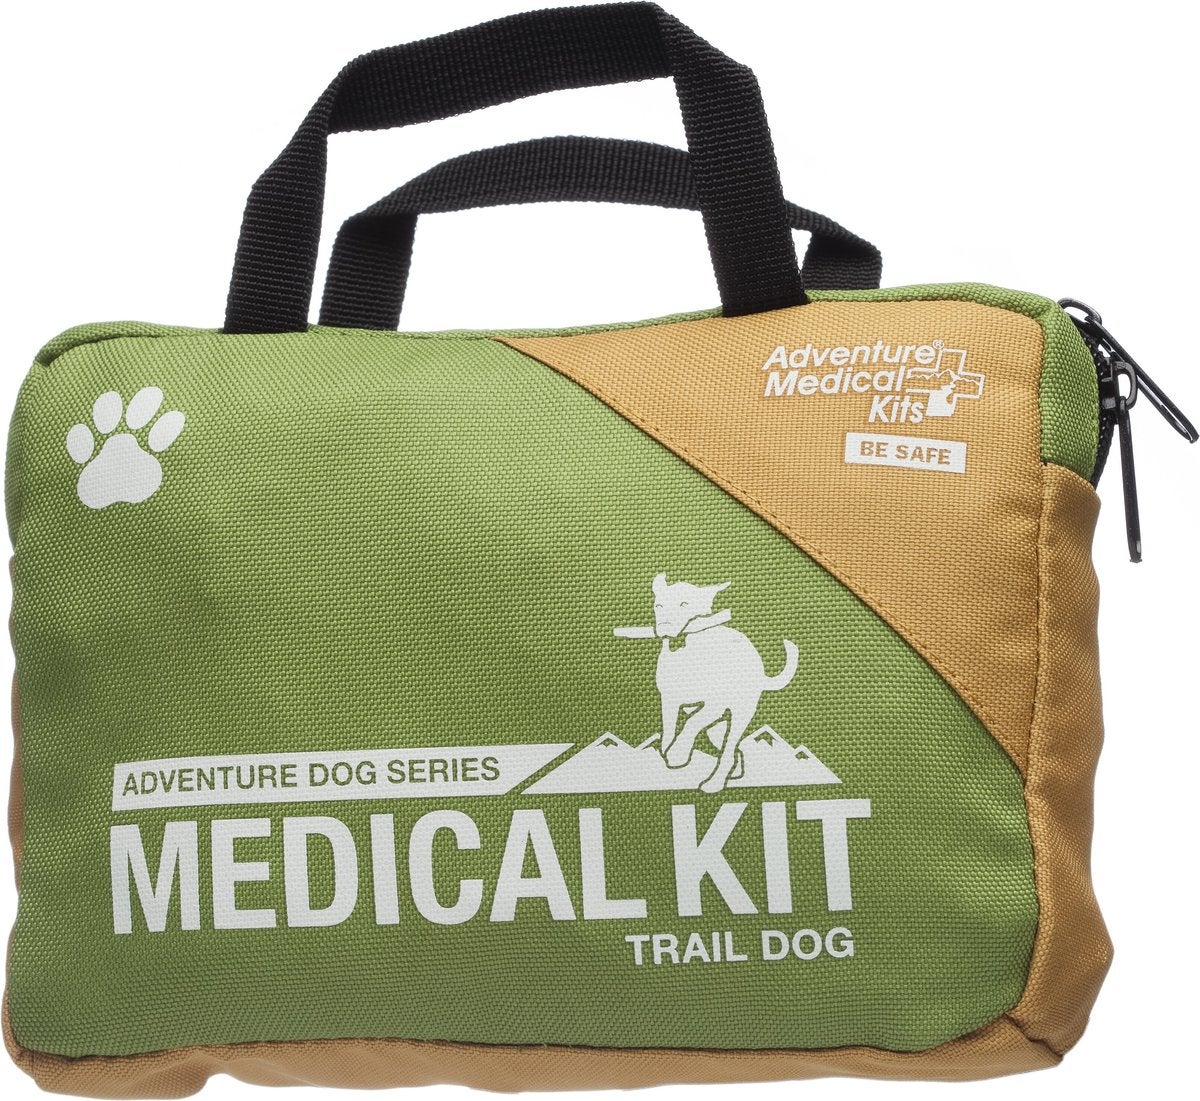 Dog camping first aid kit